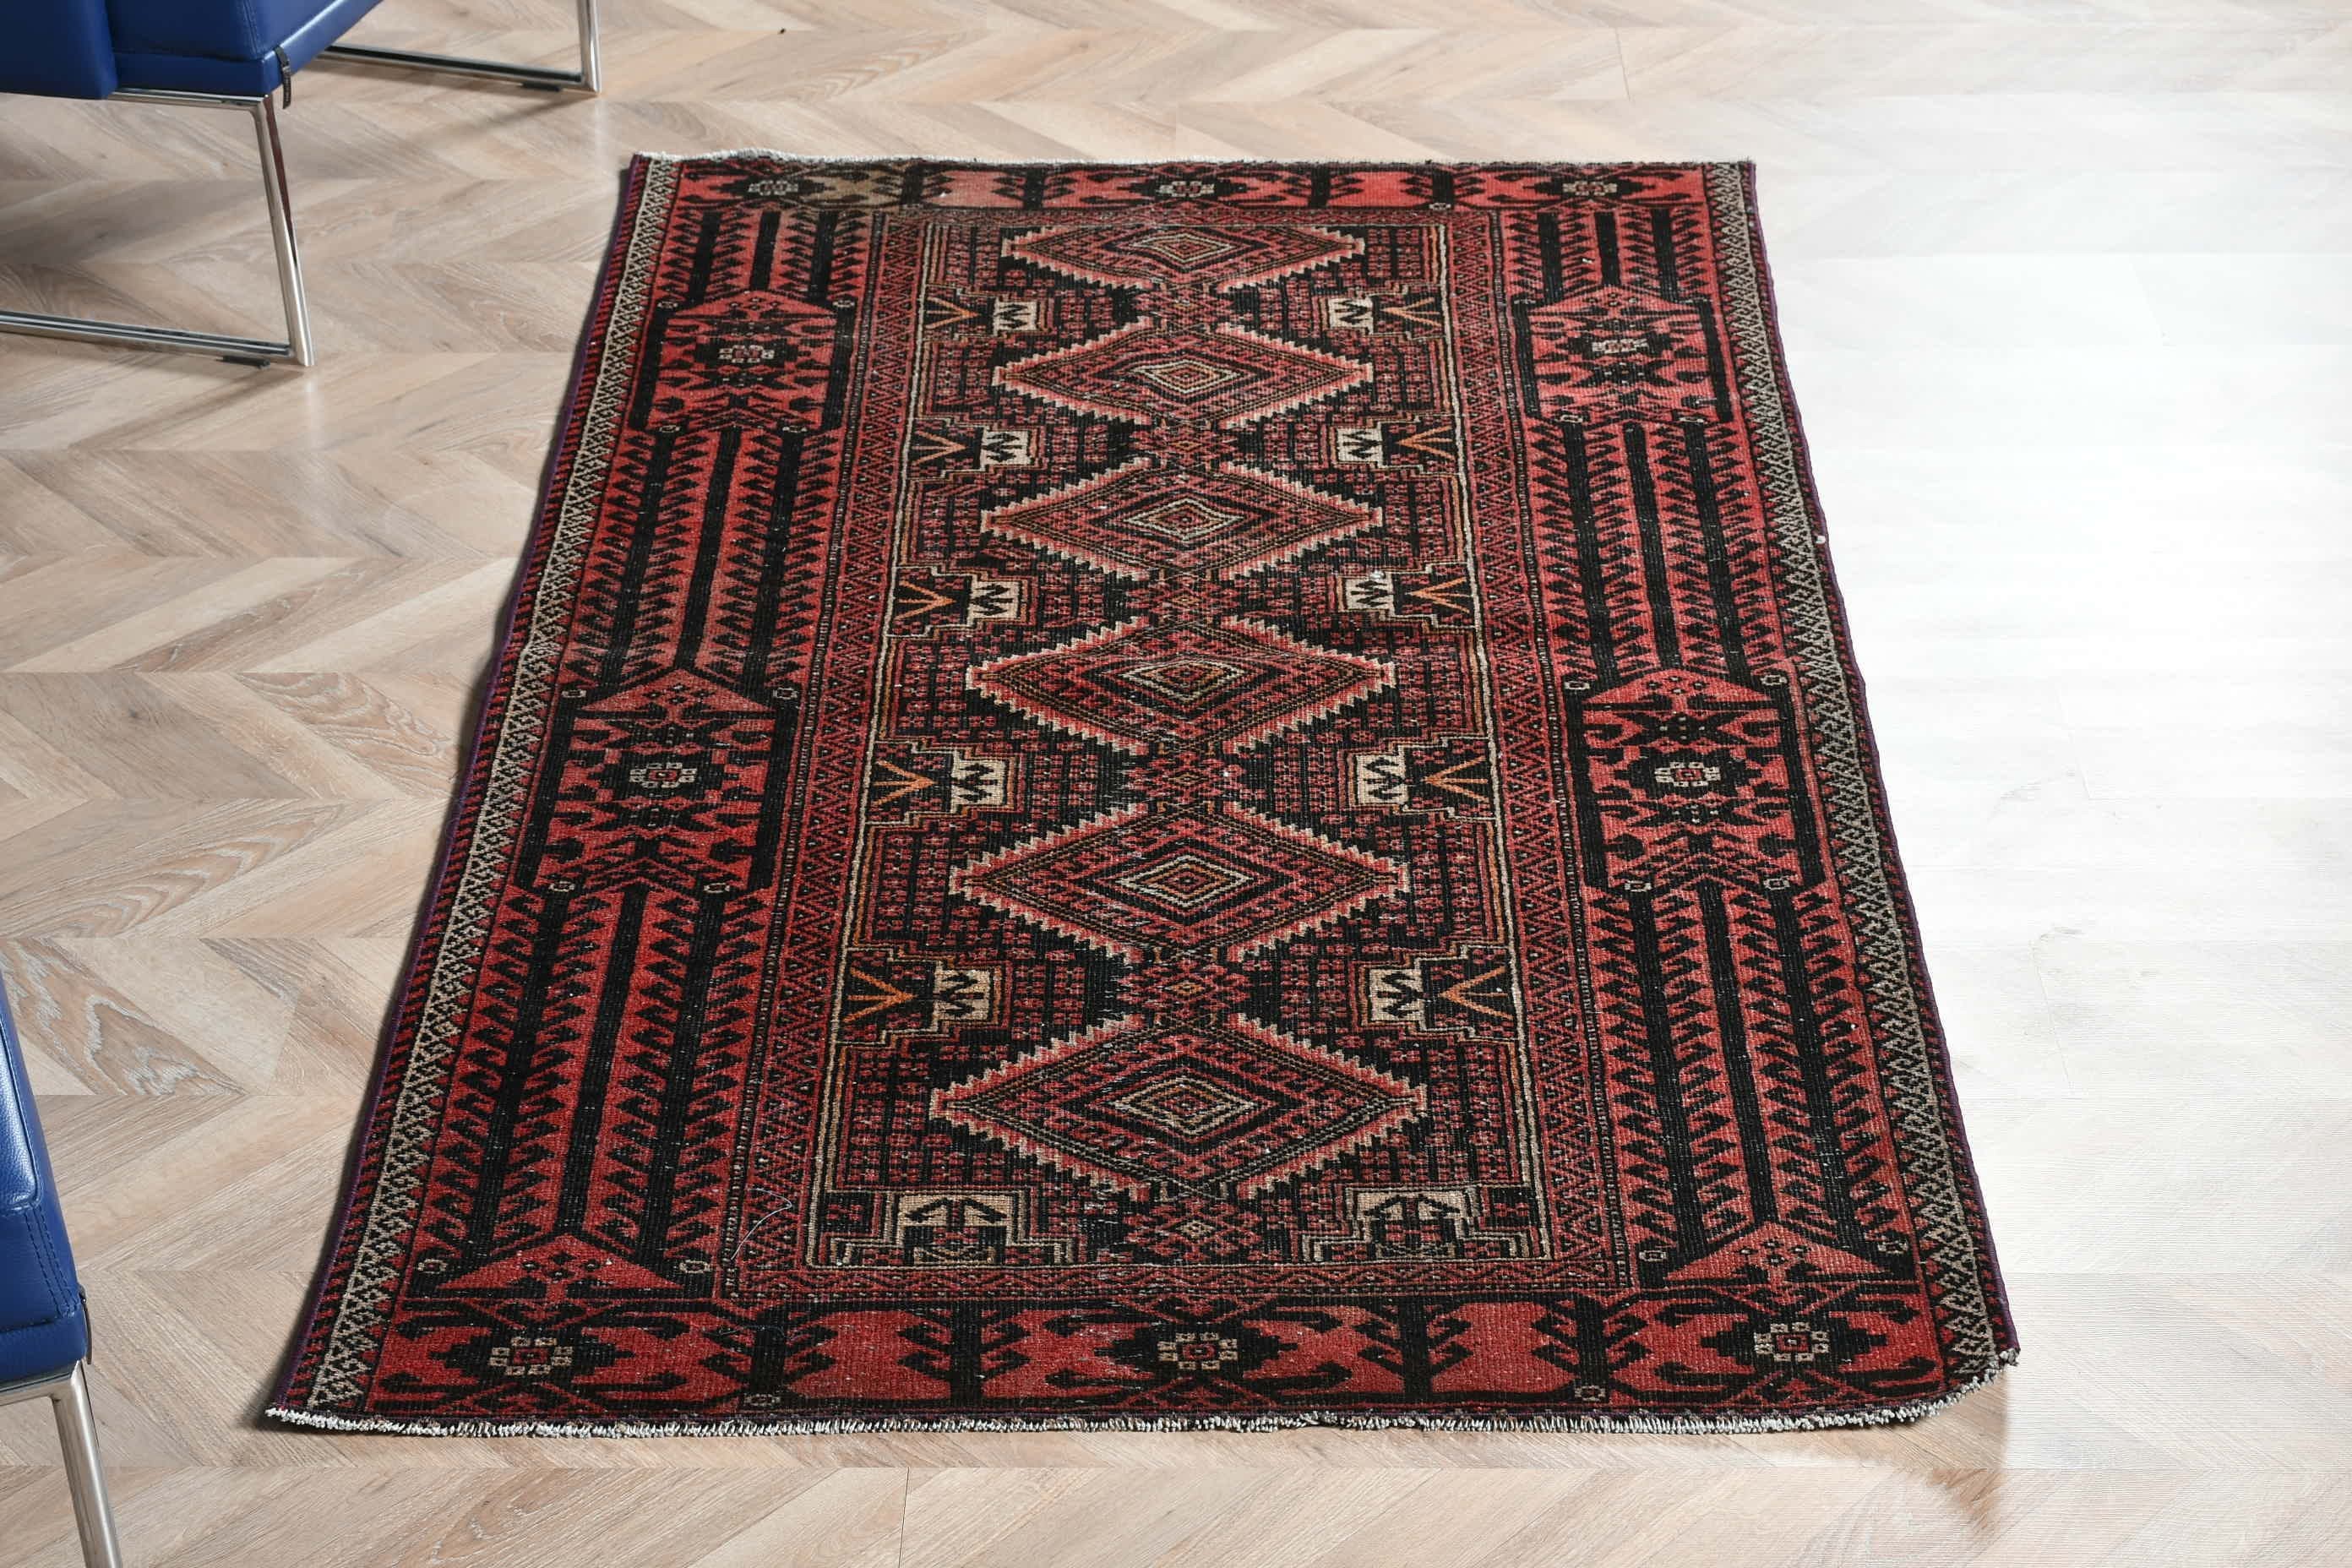 Moroccan Rugs, Oriental Rug, Rugs for Entry, Entry Rug, Turkish Rug, Nursery Rugs, Red Moroccan Rugs, Vintage Rugs, 3.5x6.3 ft Accent Rug